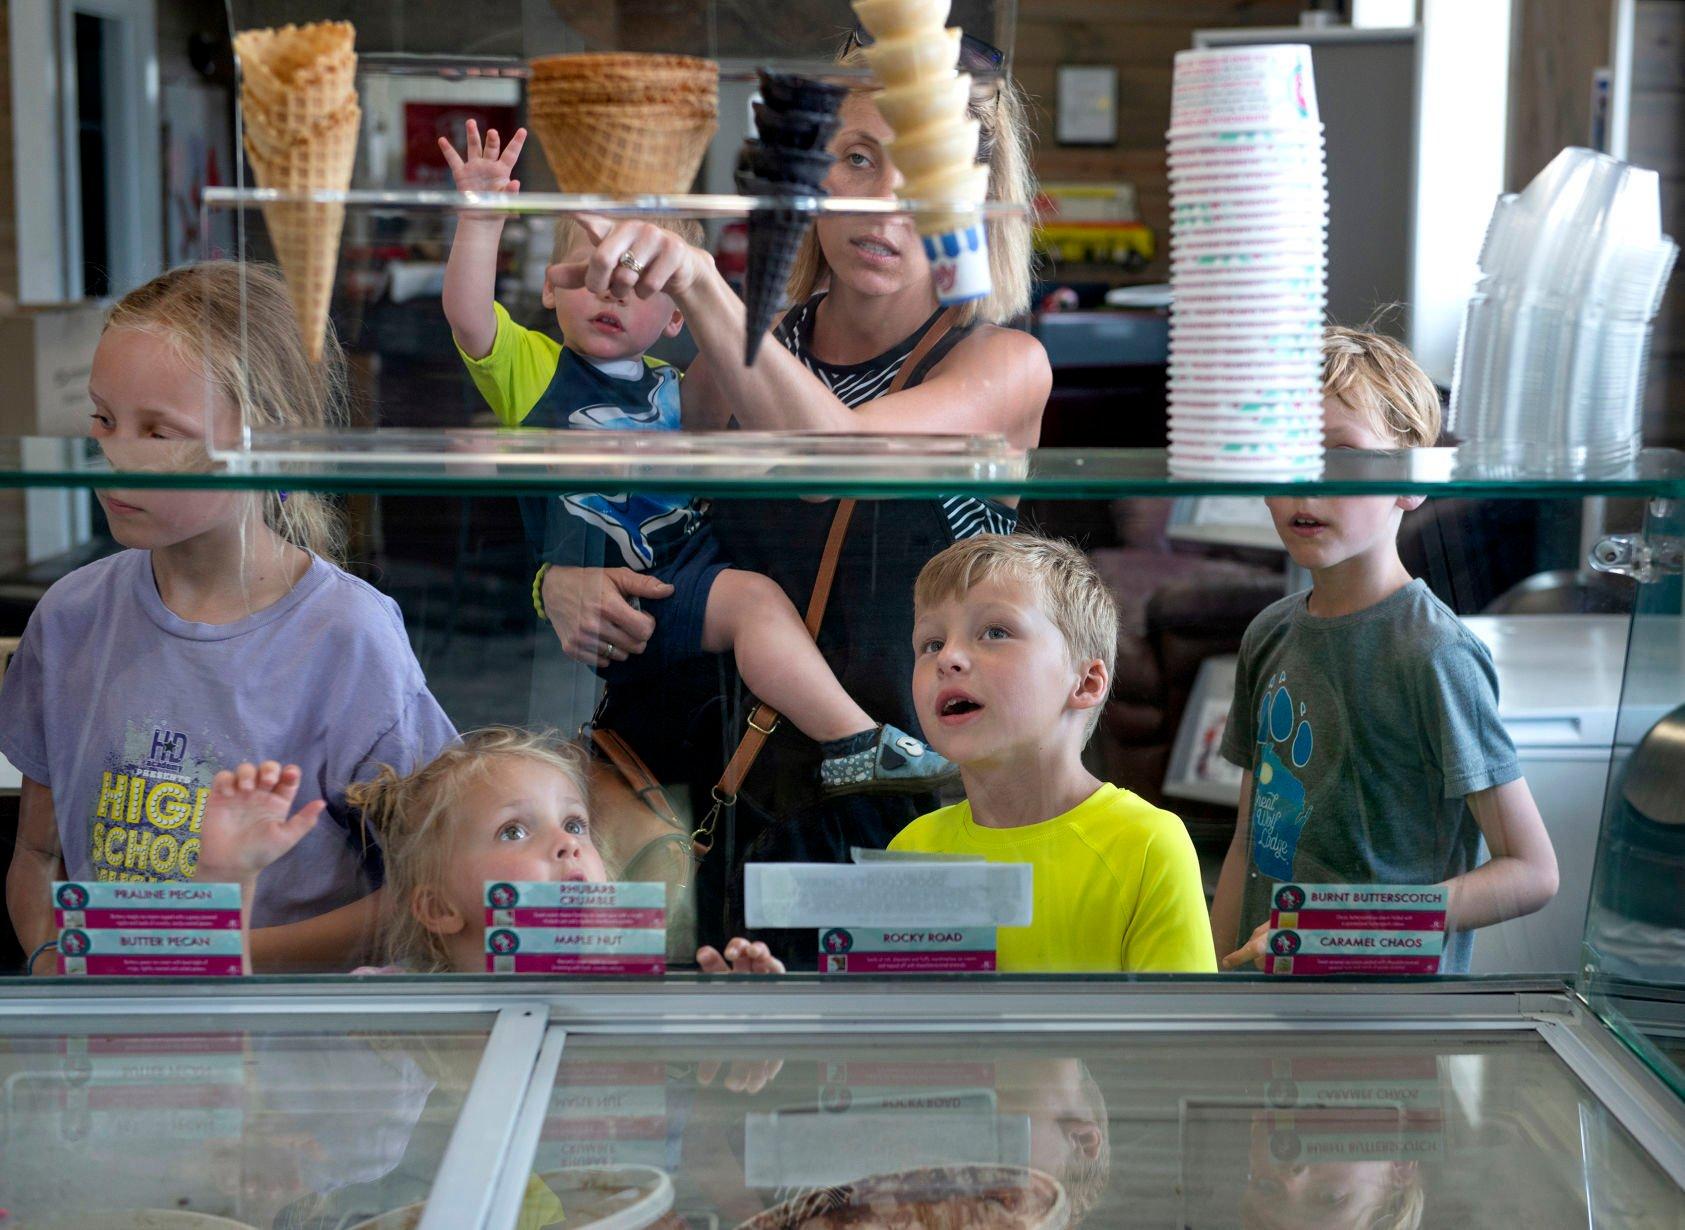 Members of the Rupp family (from left, Lily, Gracelyn, Oliver, Emmalee, Miles and Sawyer) look over the choices of ice cream and cones at Delaney’s Ice Cream Shoppe in Farley, Iowa.    PHOTO CREDIT: Dave LaBelle